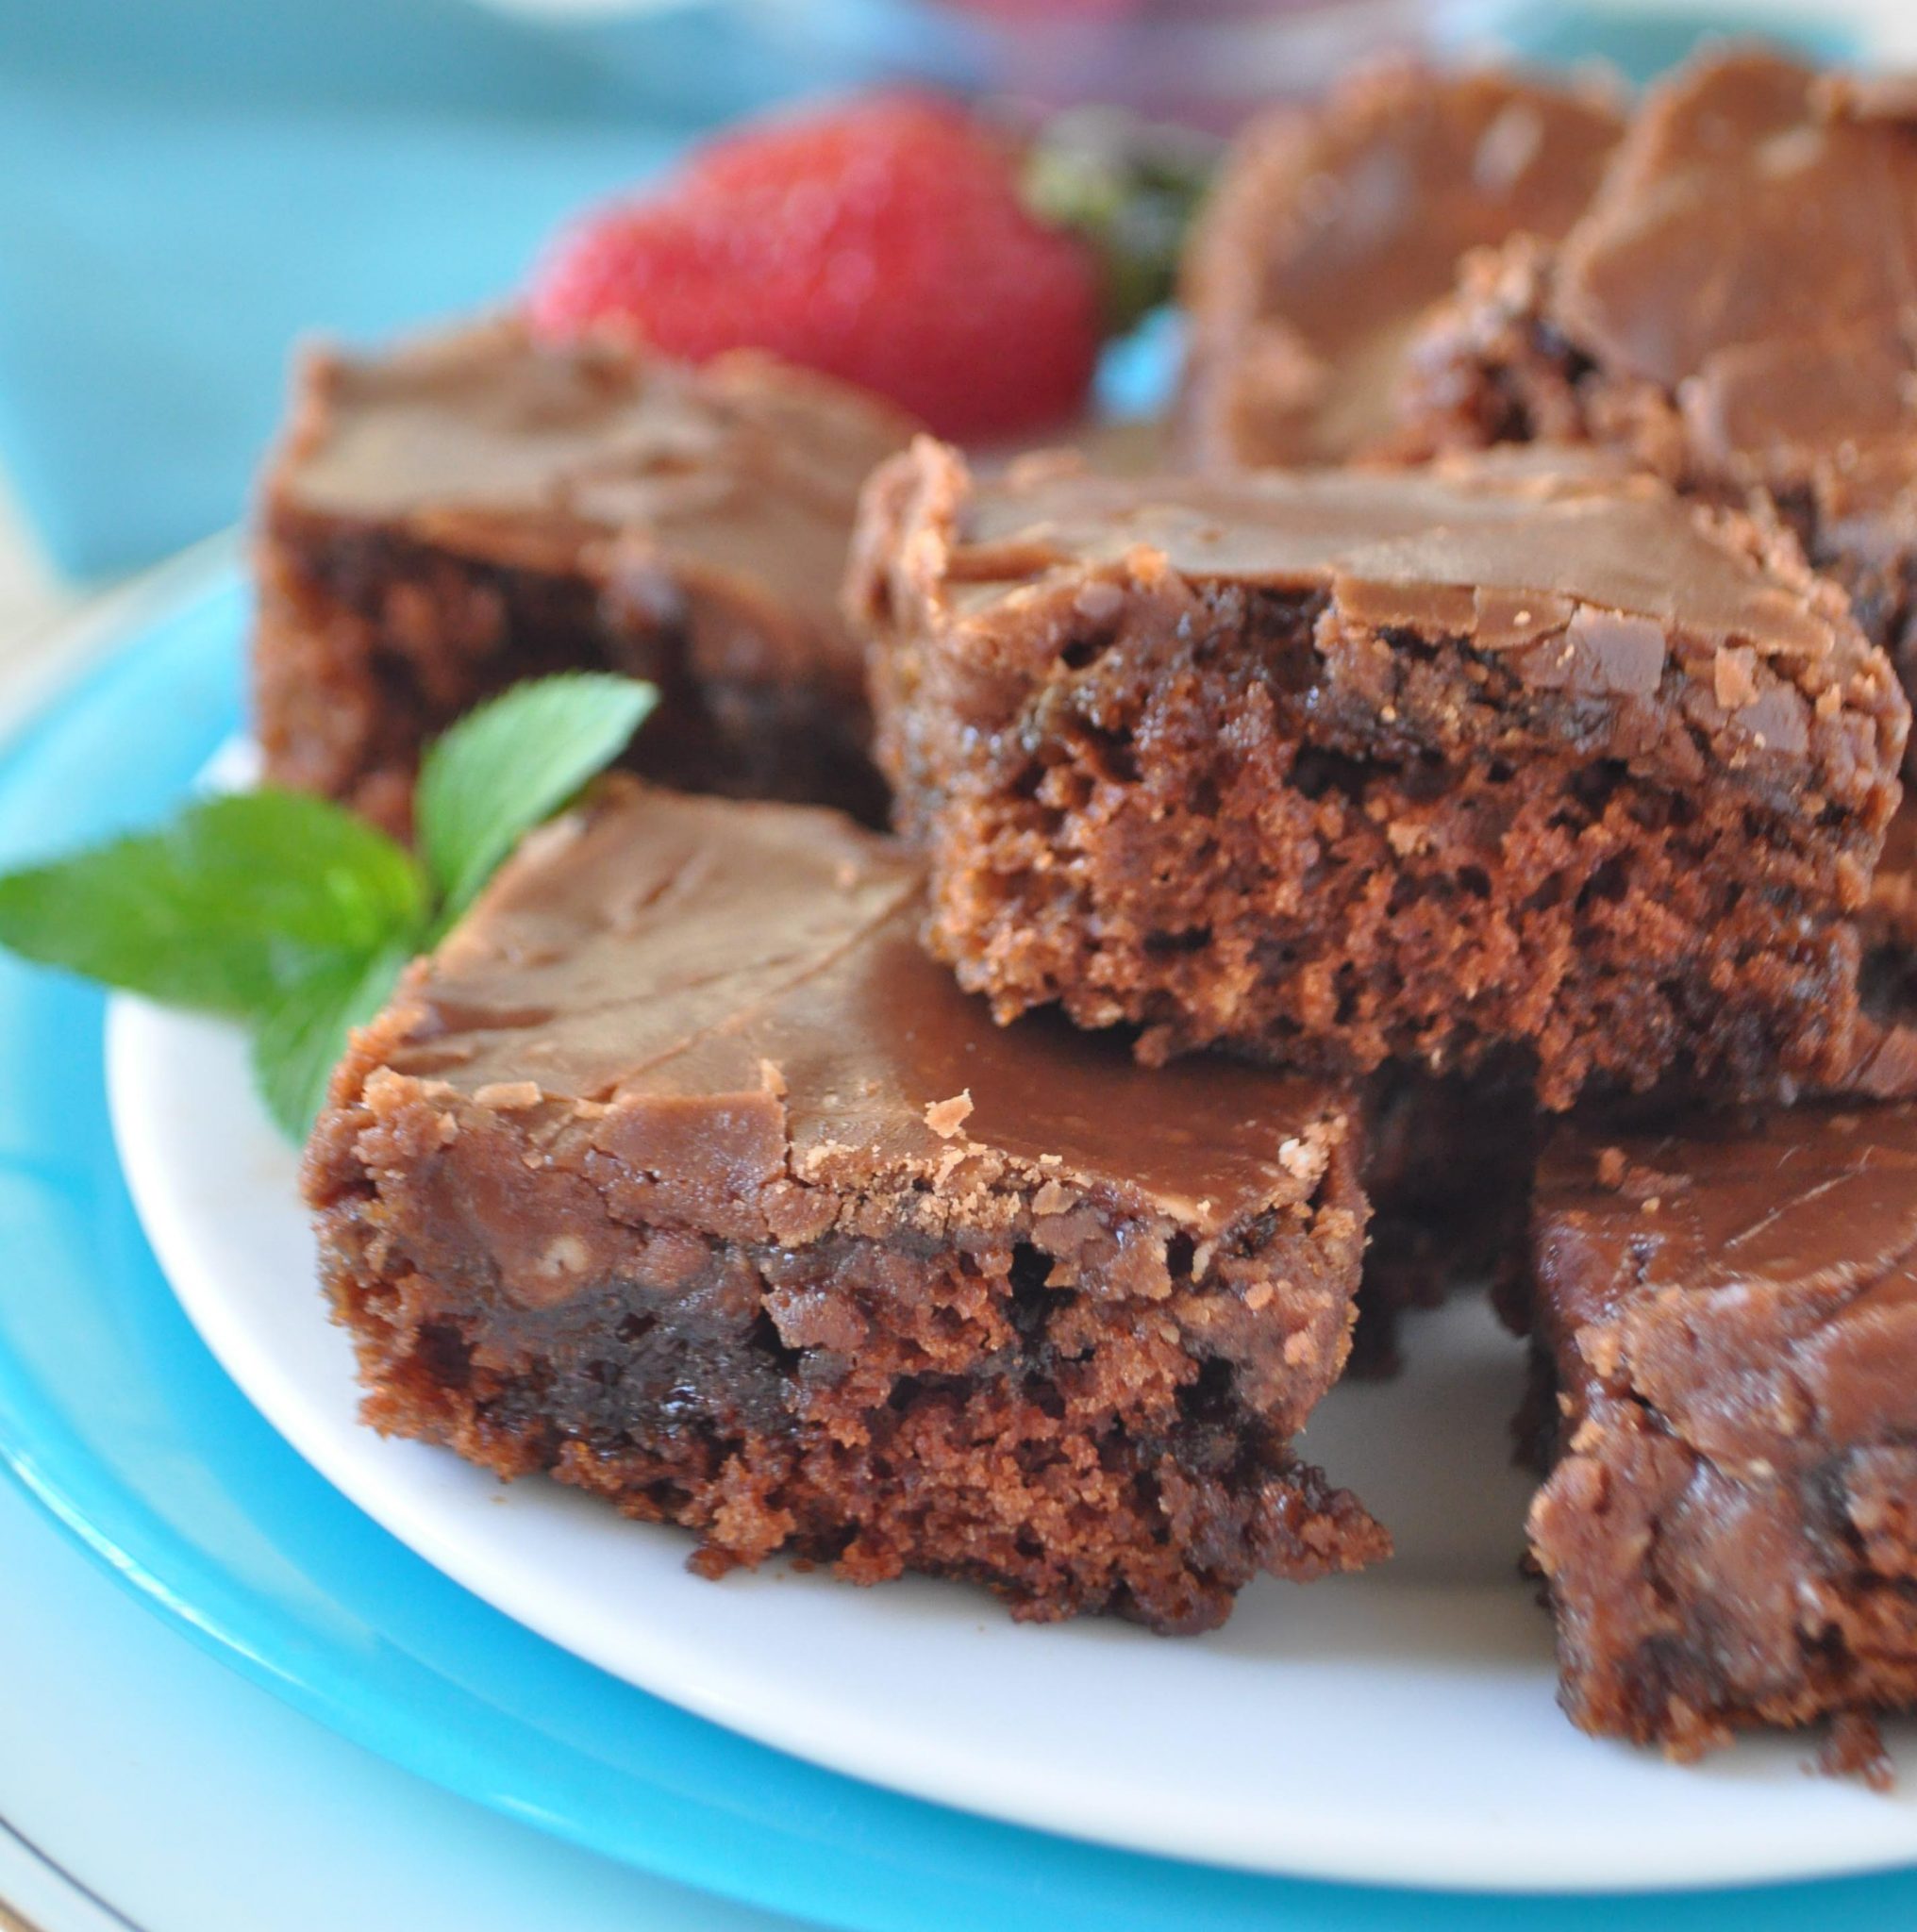 https://thehealthycookingblog.com/public/uploads/2013/04/Chcolate_Cola_Brownies_72021-21.jpg